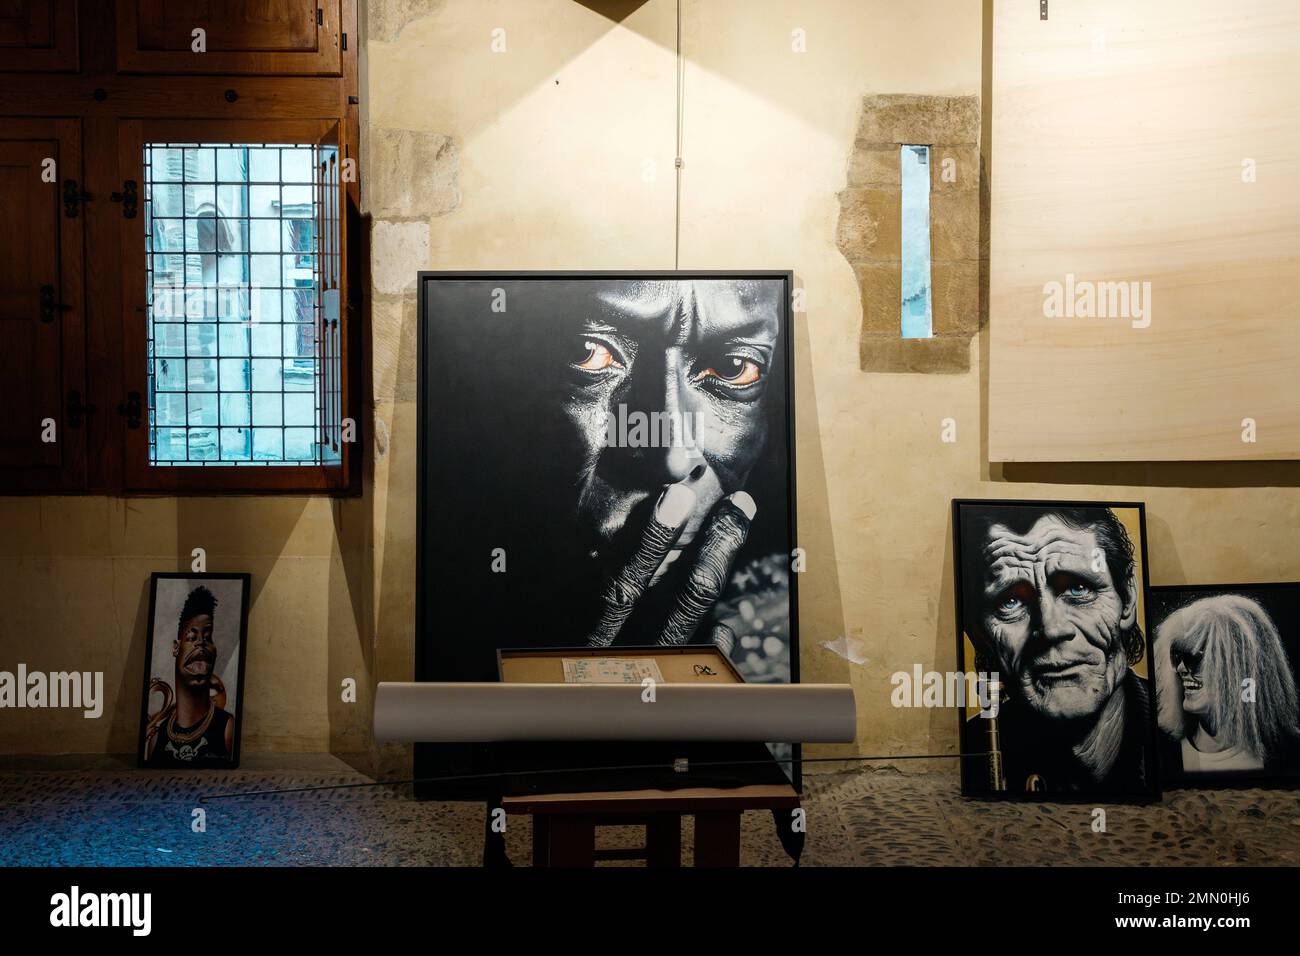 France, Pyrenees Atlantiques, Bearn, Nay, Maison Carree, artistic exhibition room of contemporary art in an old historic stone building Stock Photo